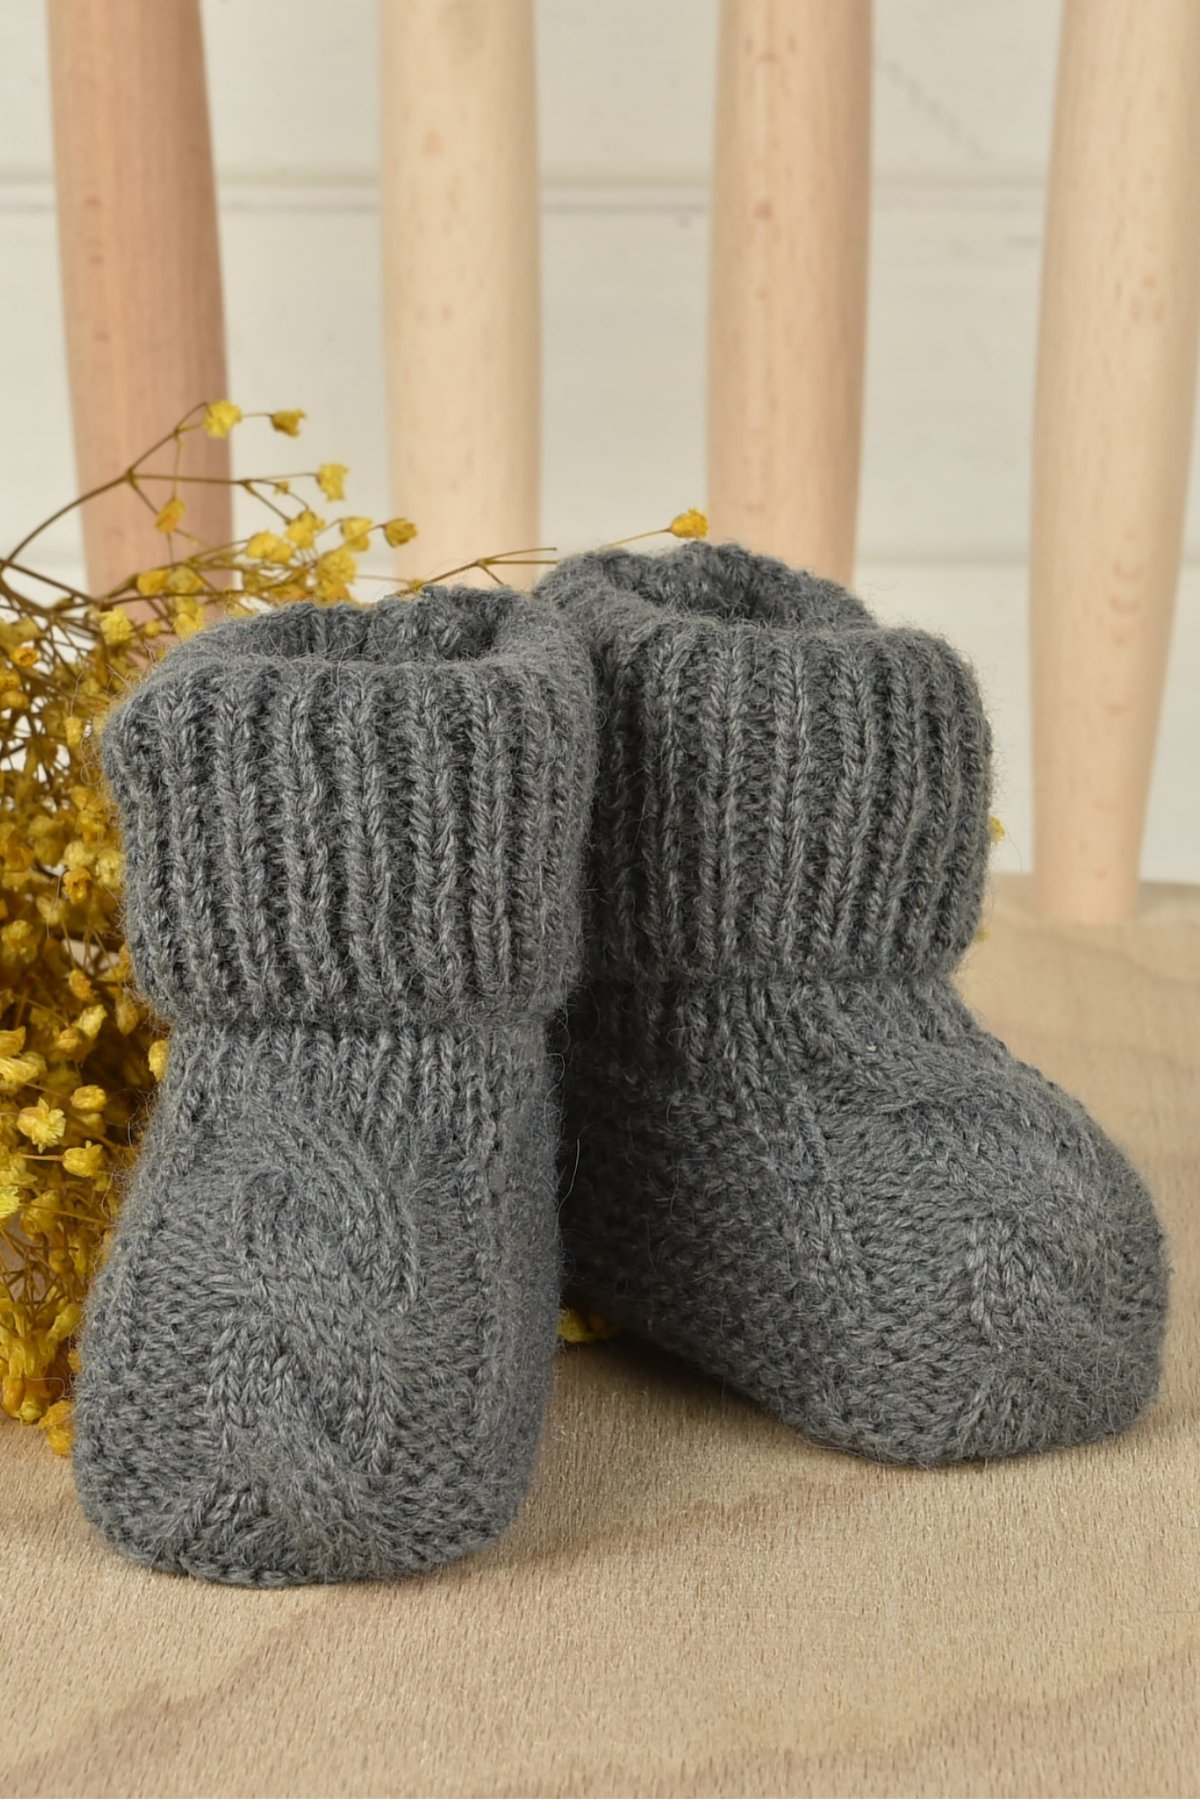 Baby Booties-Gray/Gri  3-9 Month   %Soft Acrlyc